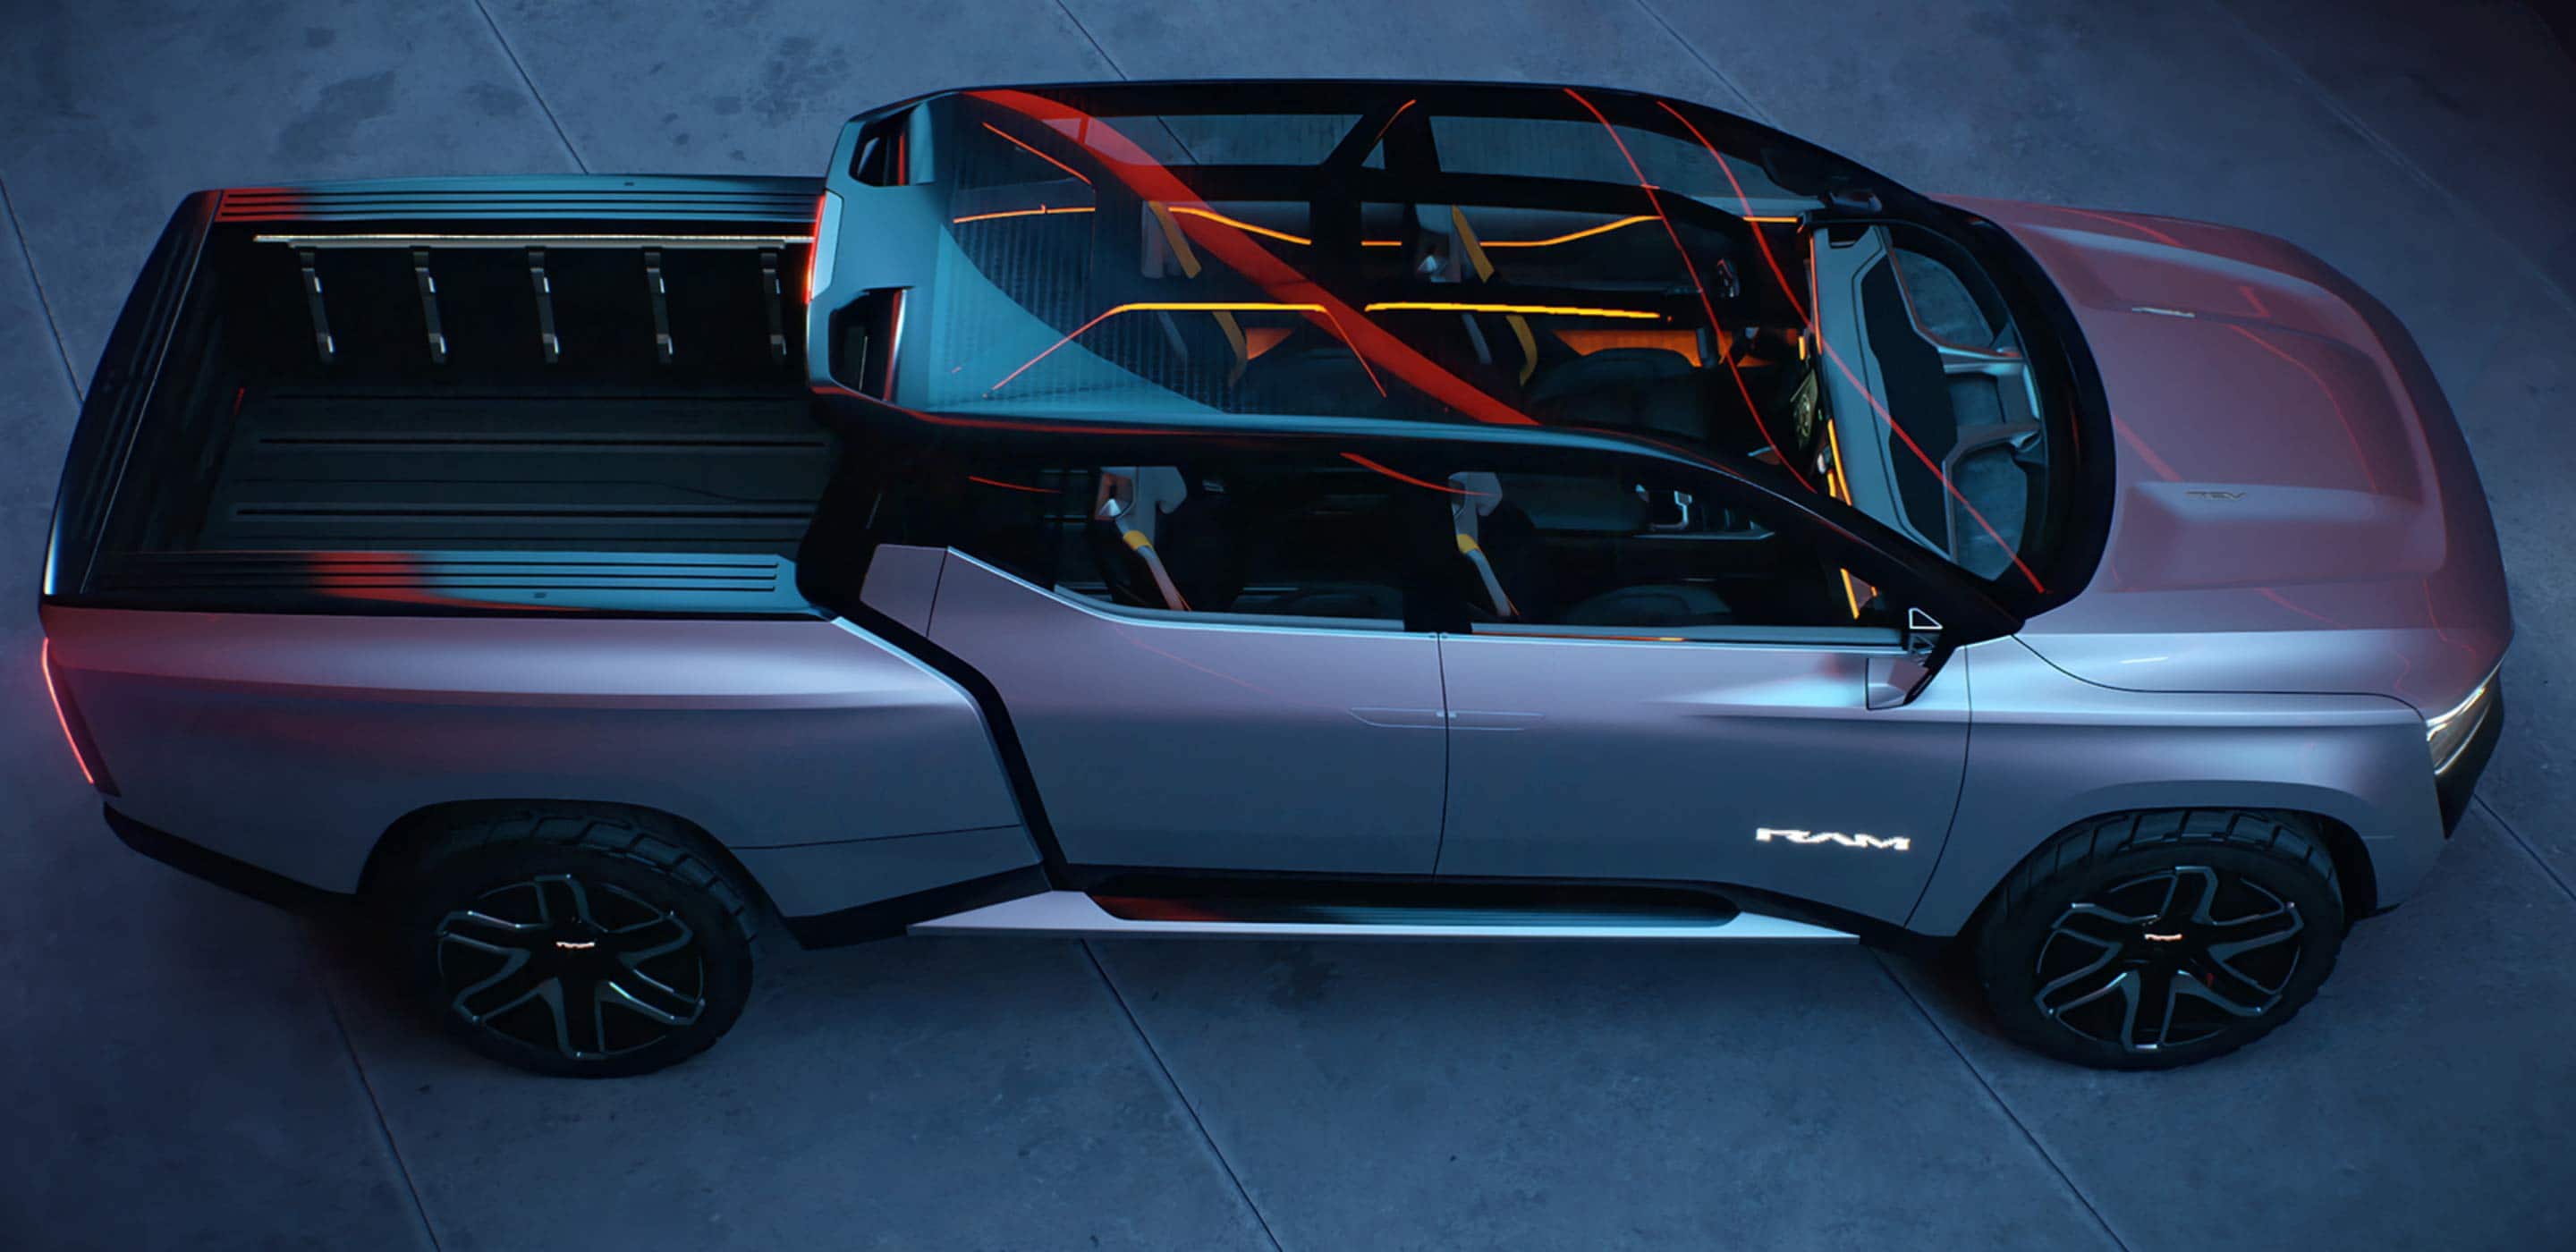 Display A raised angle of the Ram Revolution Concept highlighting the one-piece electro-chromatic glass roof.